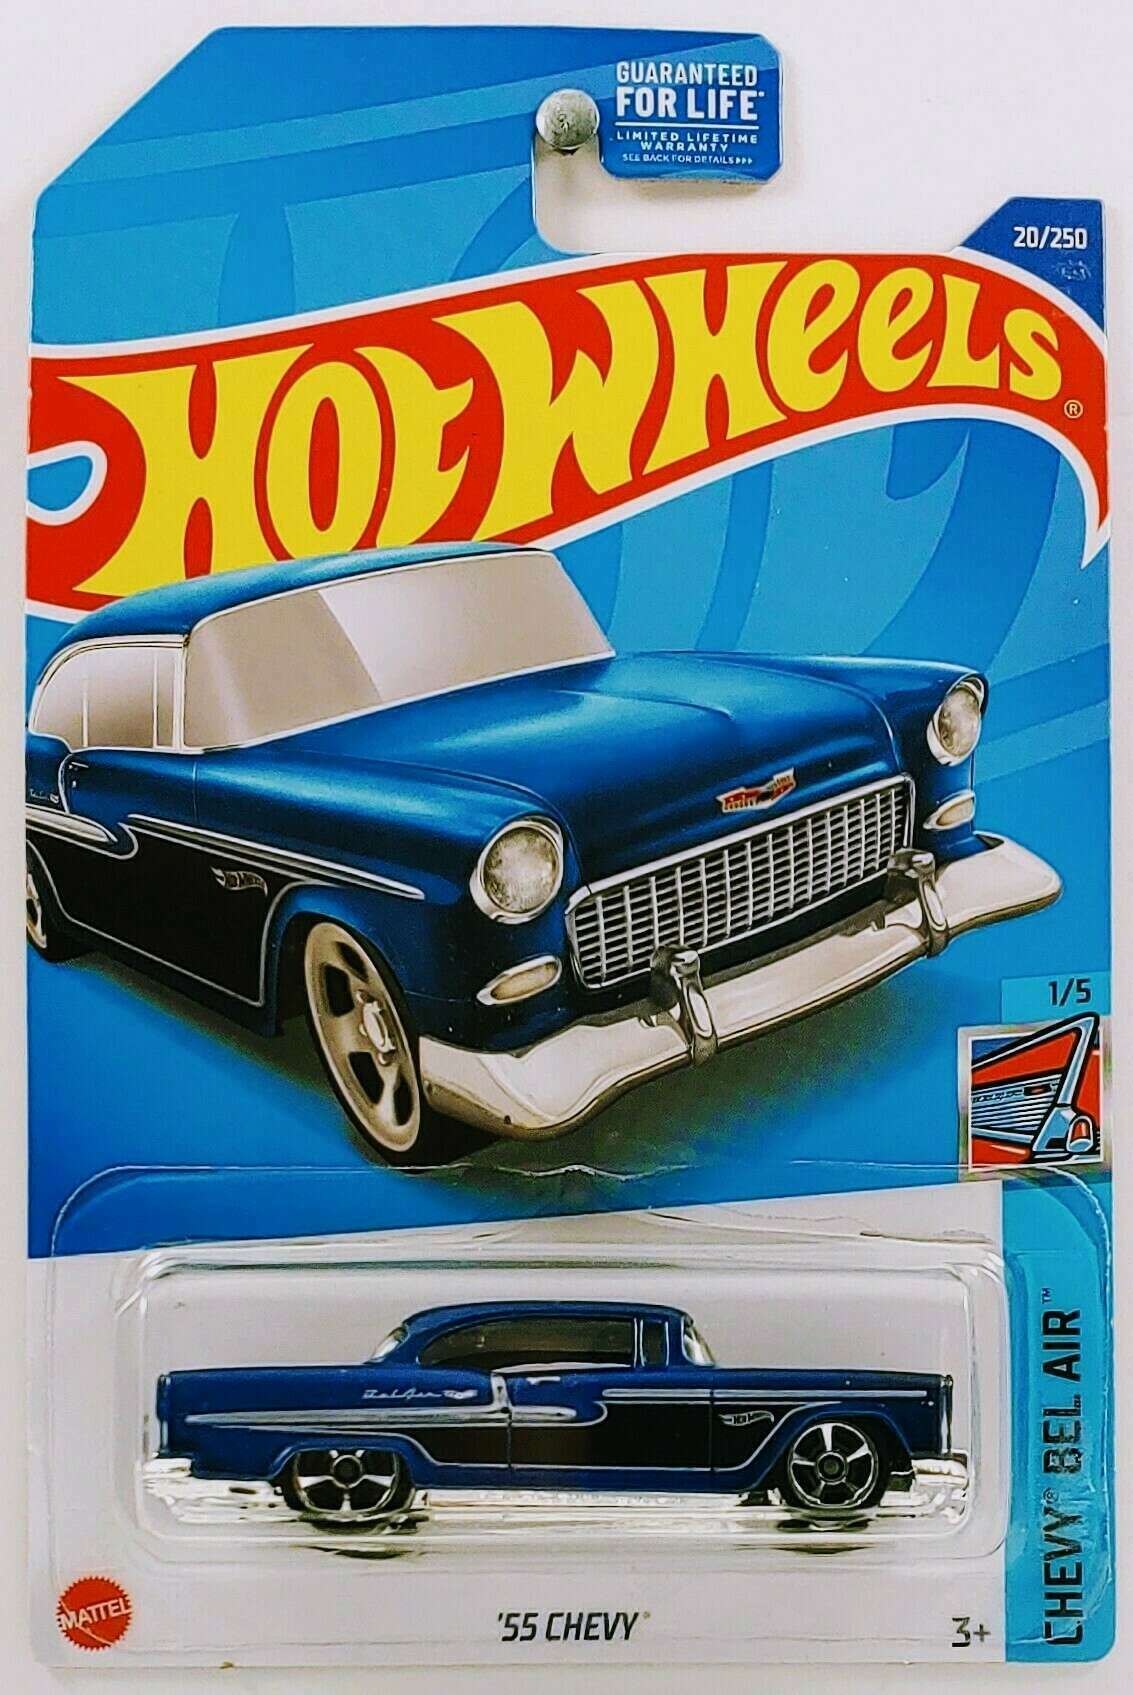 Hot Wheels 2022 - Collector # 020/250 - Chevy Bel Air 1/5 - '55 Chevy - Blue - USA